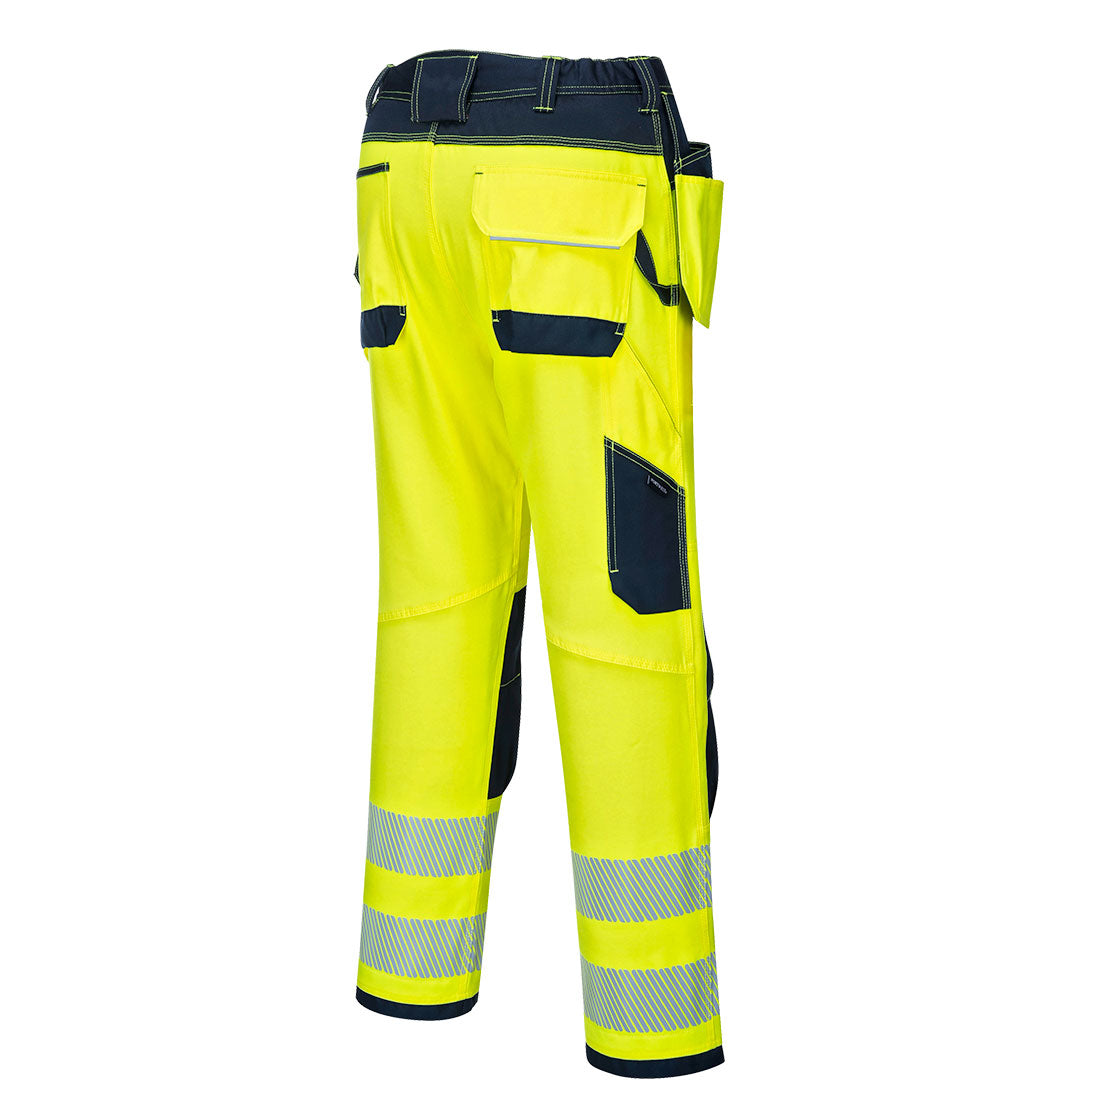 Portwest T501 PW3 Hi Vis Holster Work Trousers 1#colour_yellow-navy 2#colour_yellow-navy 3#colour_yellow-navy